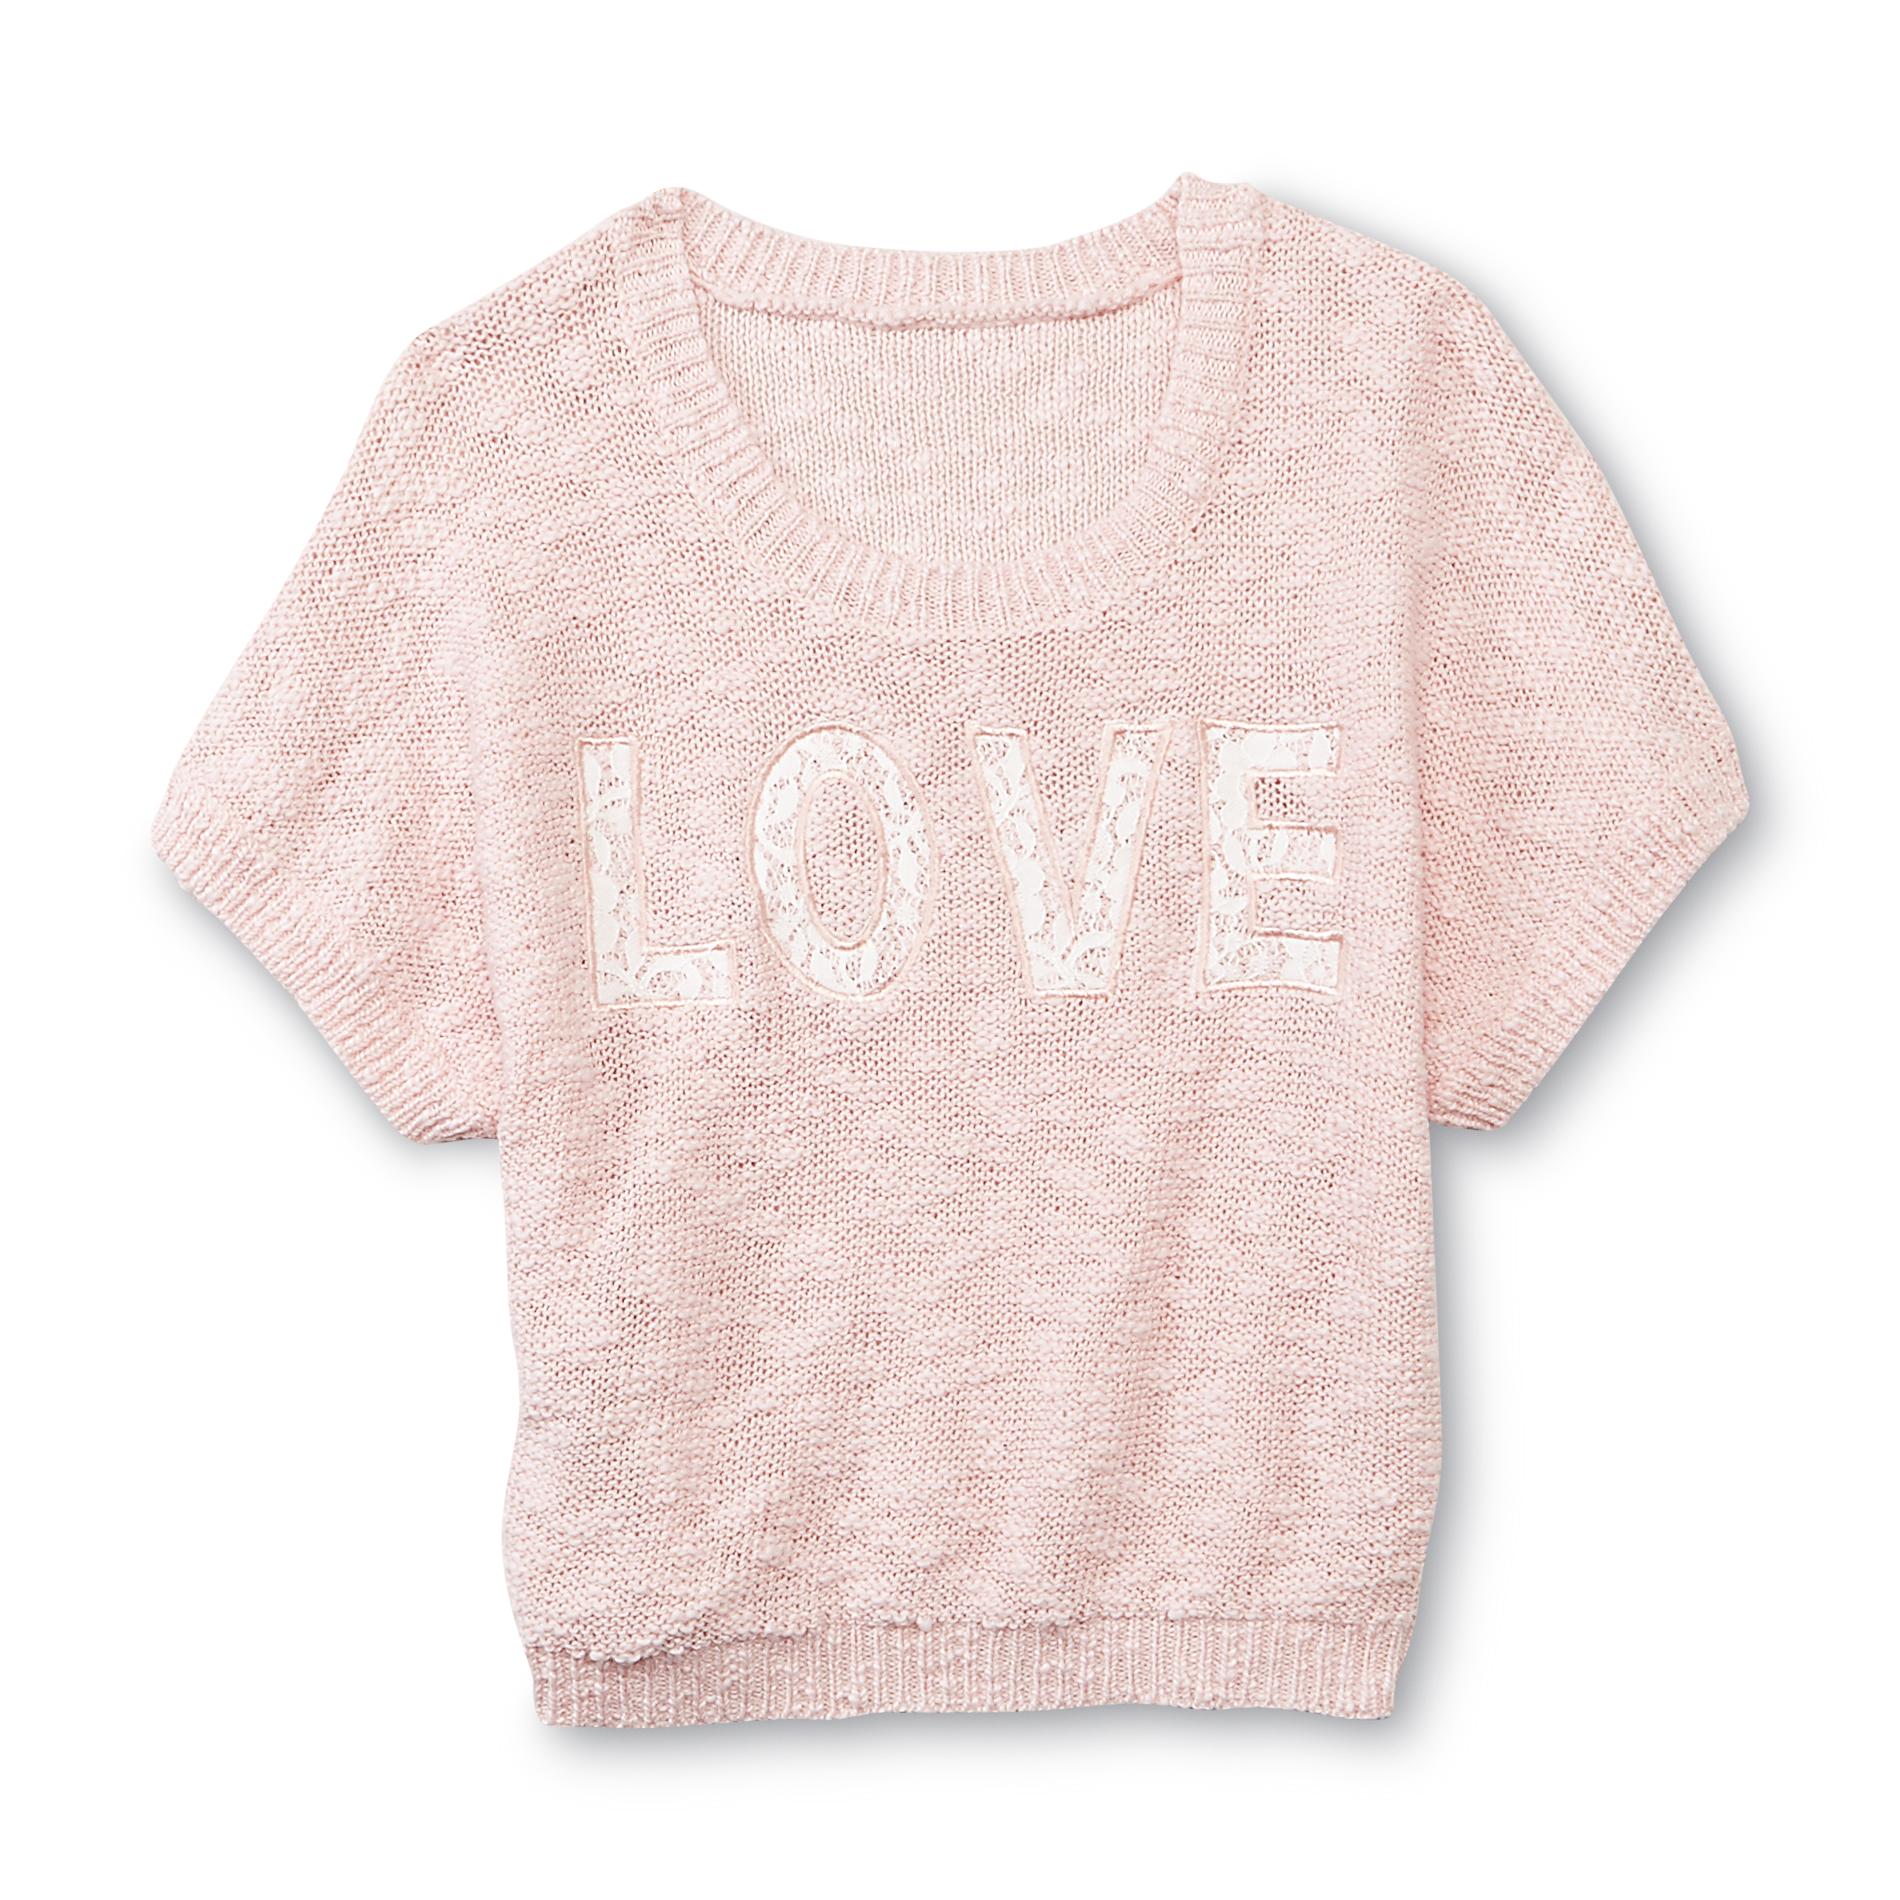 Canyon River Blues Girl's Short-Sleeve Sweater - Love